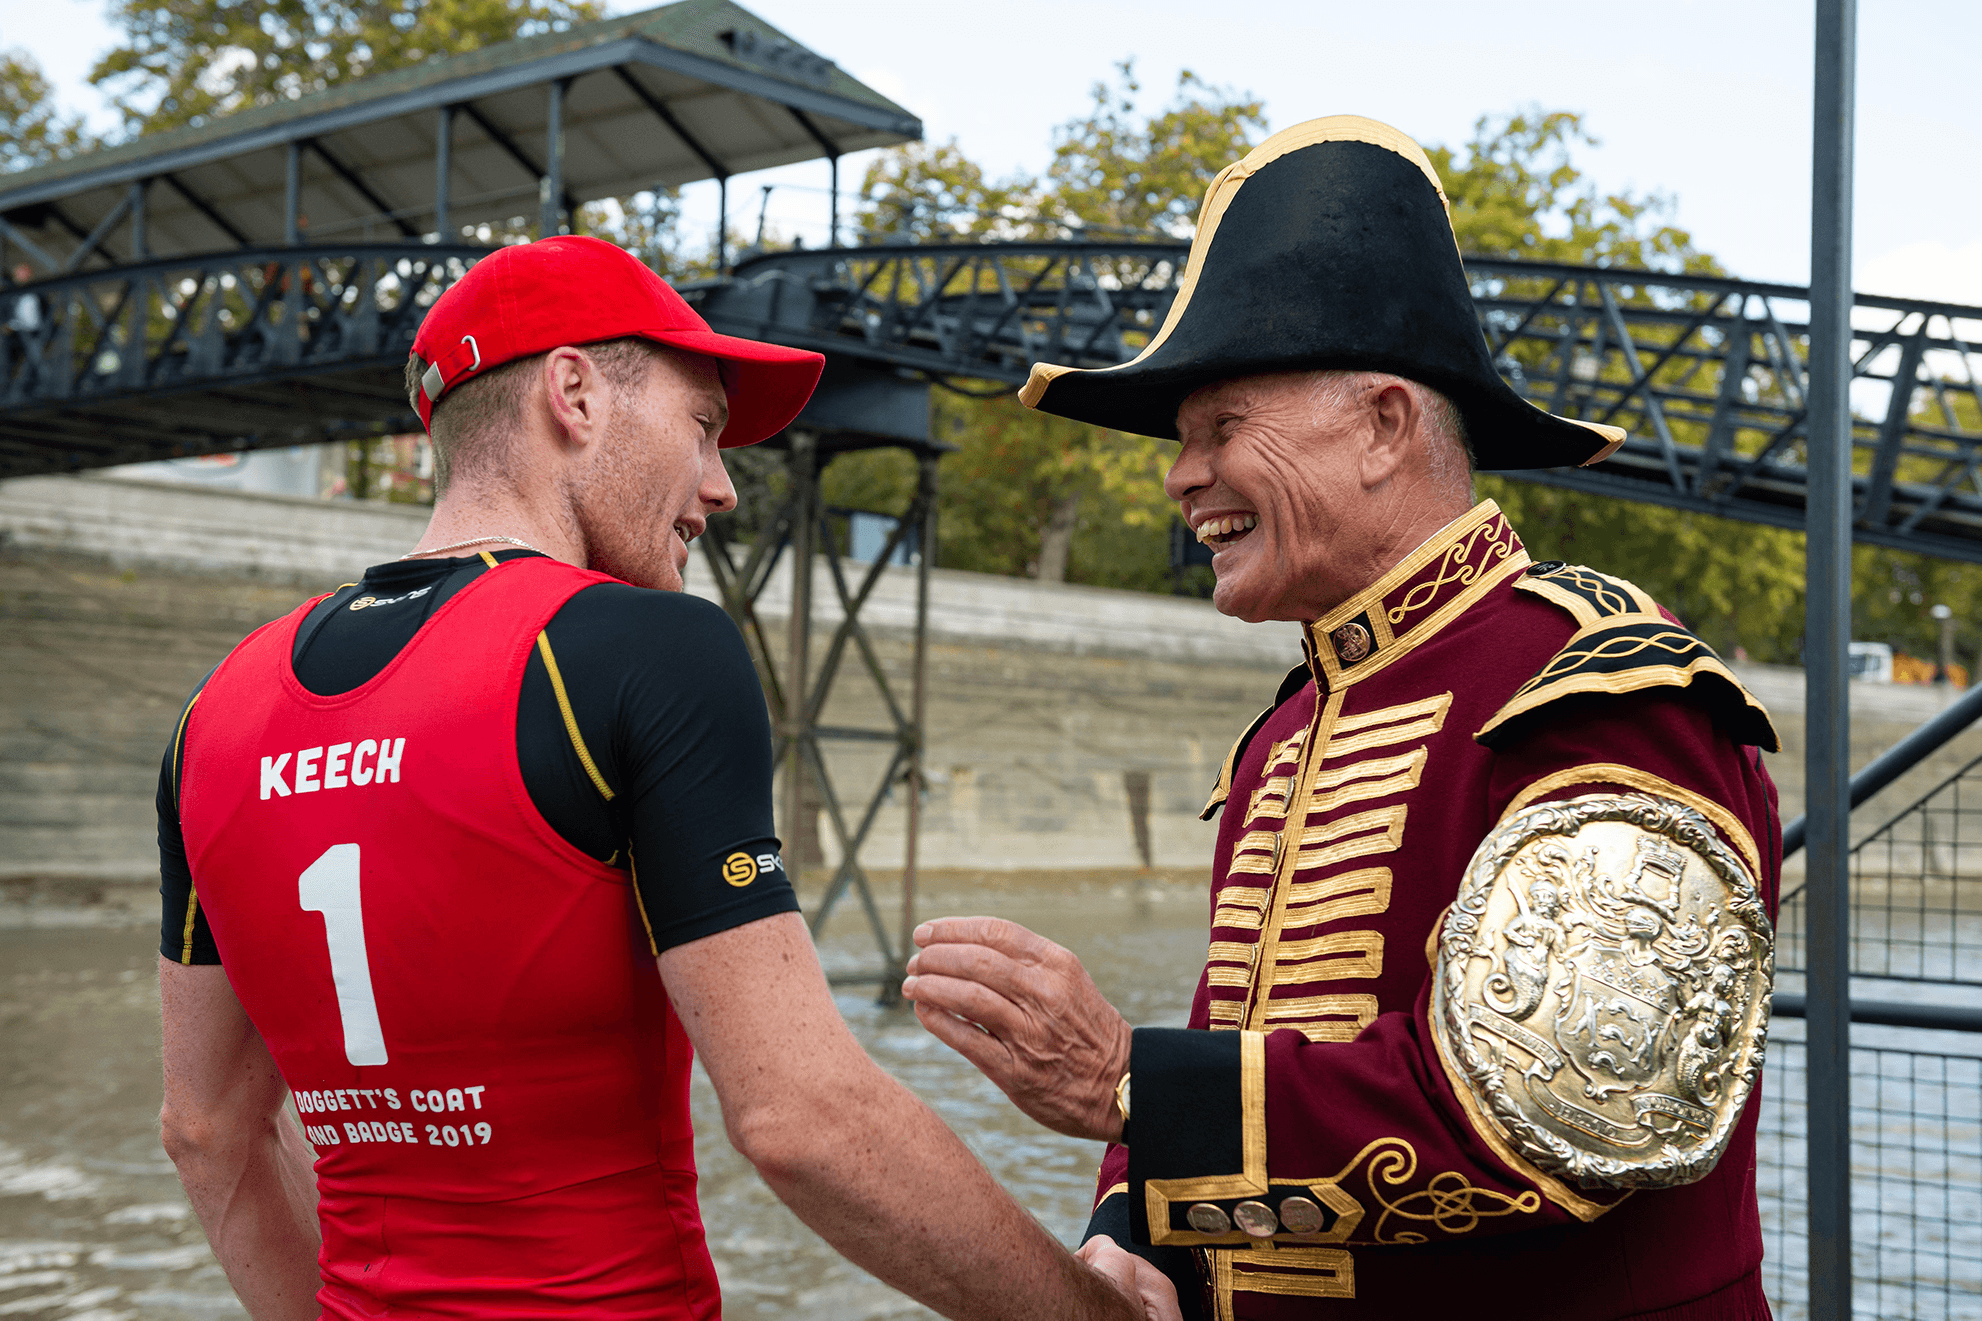 Sculler Patrick Keech, who won the 2019 race, with race umpire Bob Prentice.